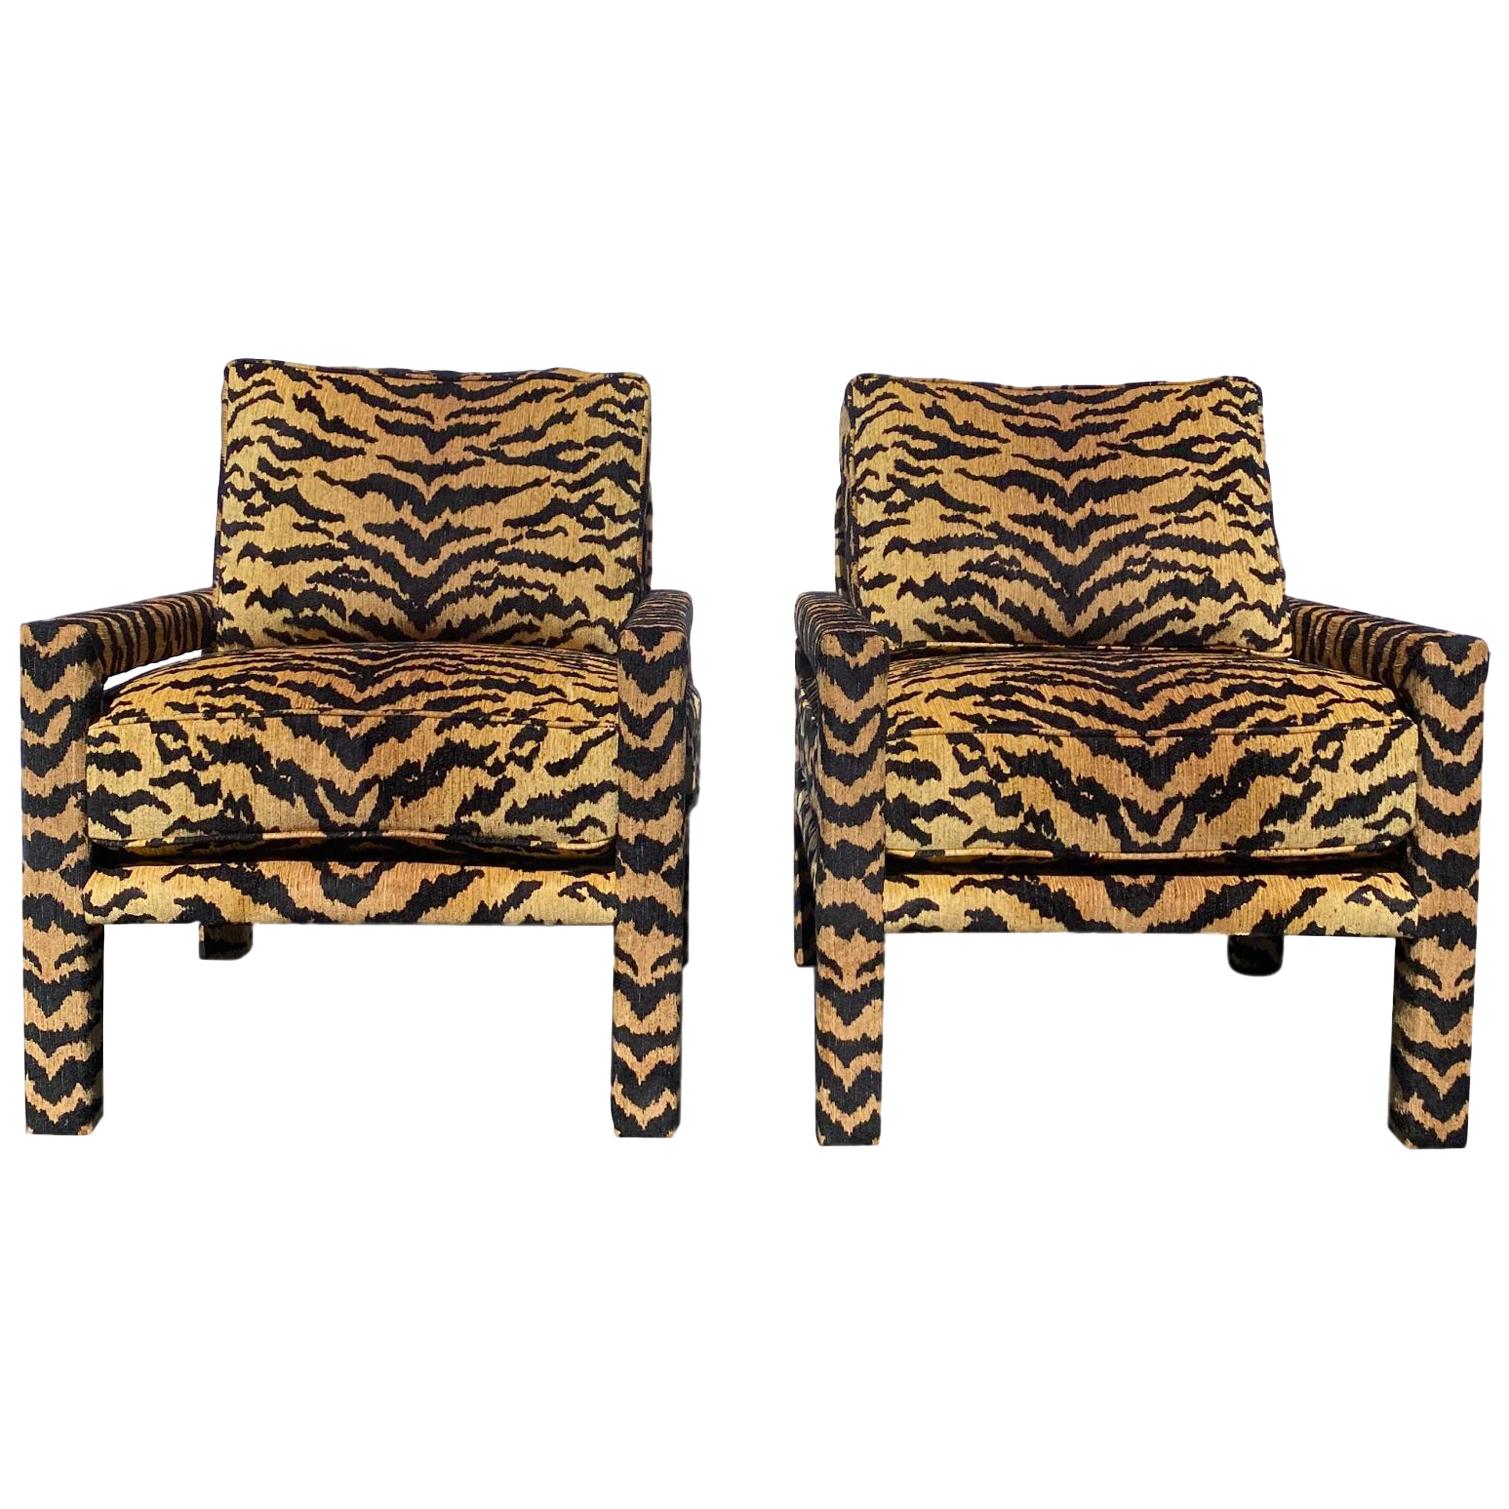 Pair of New Milo Baughman Style Parsons Chairs in Designer Tiger Fabric